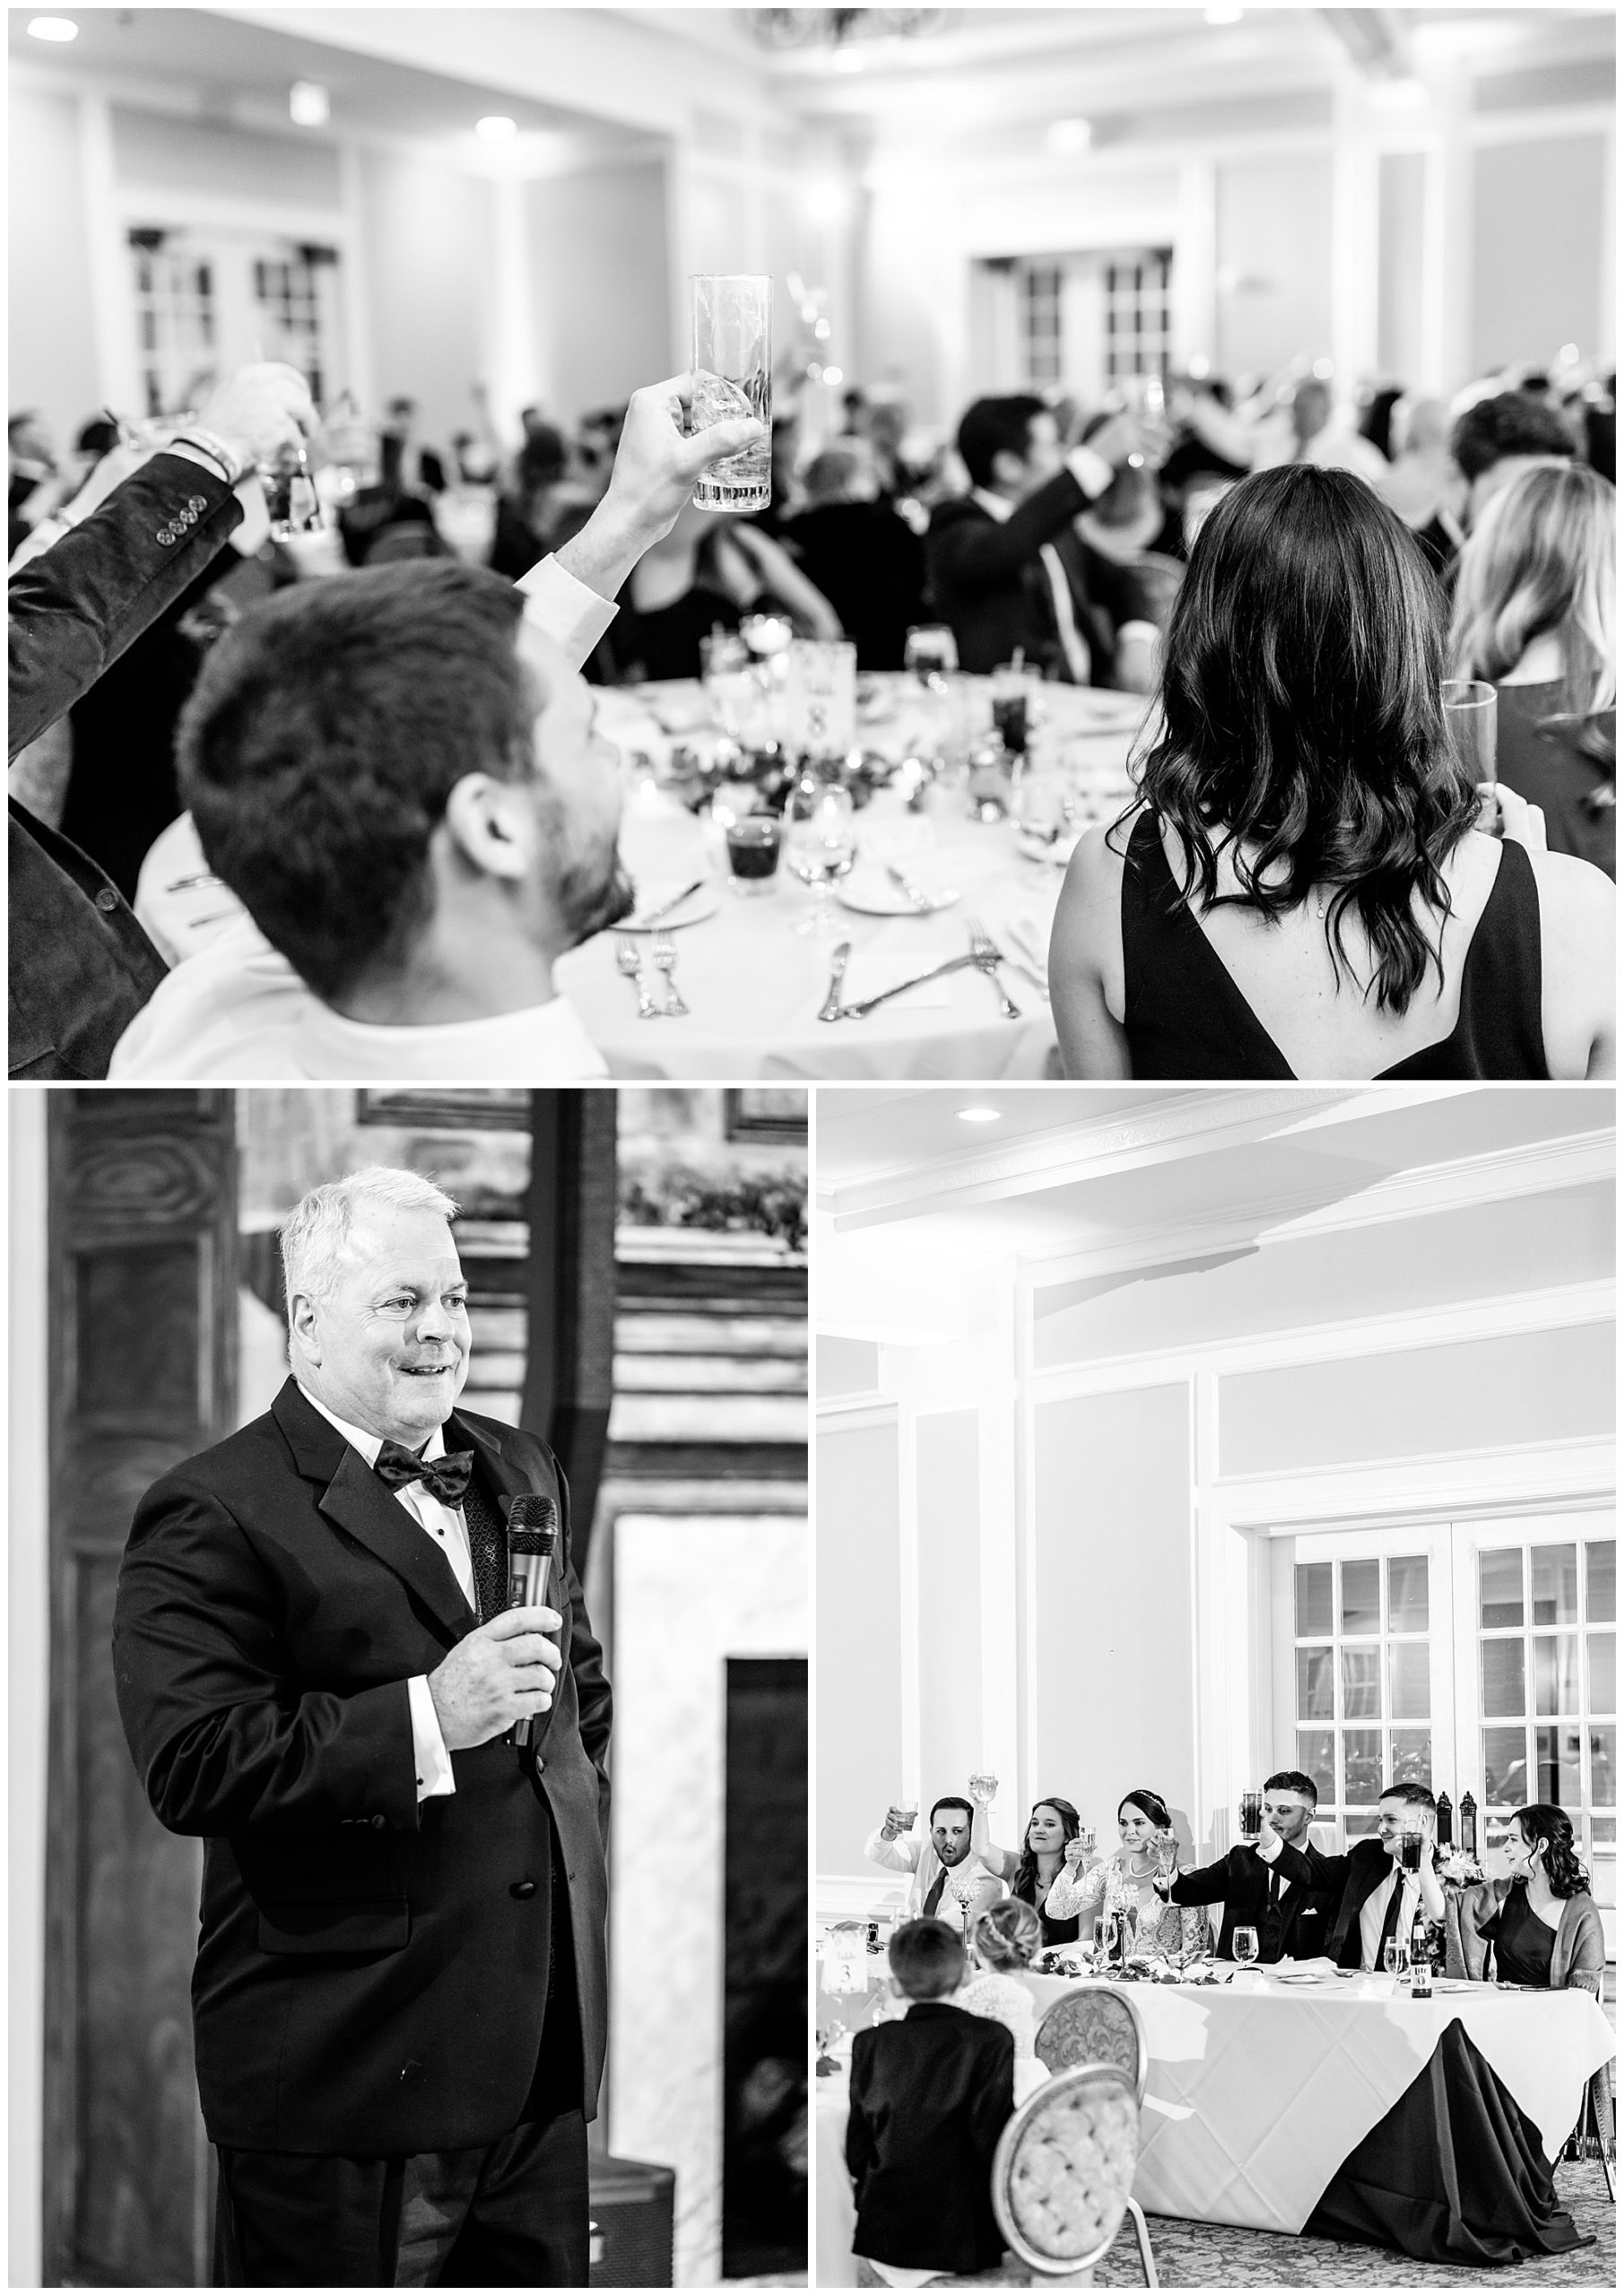 royal inspired Country Club of Fairfax wedding, Fairfax VA photographer, country club wedding, DC area country club, DC country club wedding, DC wedding photography, northern Virginia wedding photography,DC wedding photographer, golf course wedding, winter wedding, royals inspired wedding, Rachel E.H. Photography, black and white, wedding speech, man toasting